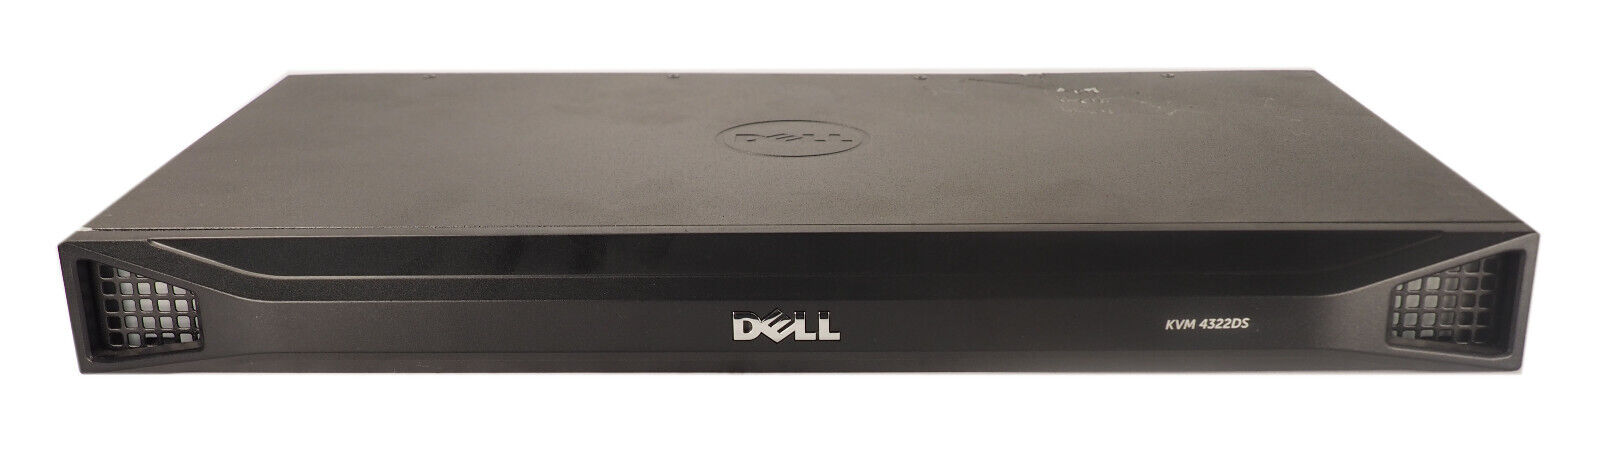 Dell KVM 4322DS 0F4W28 32 Port Console Switch mild damage to the top metal case